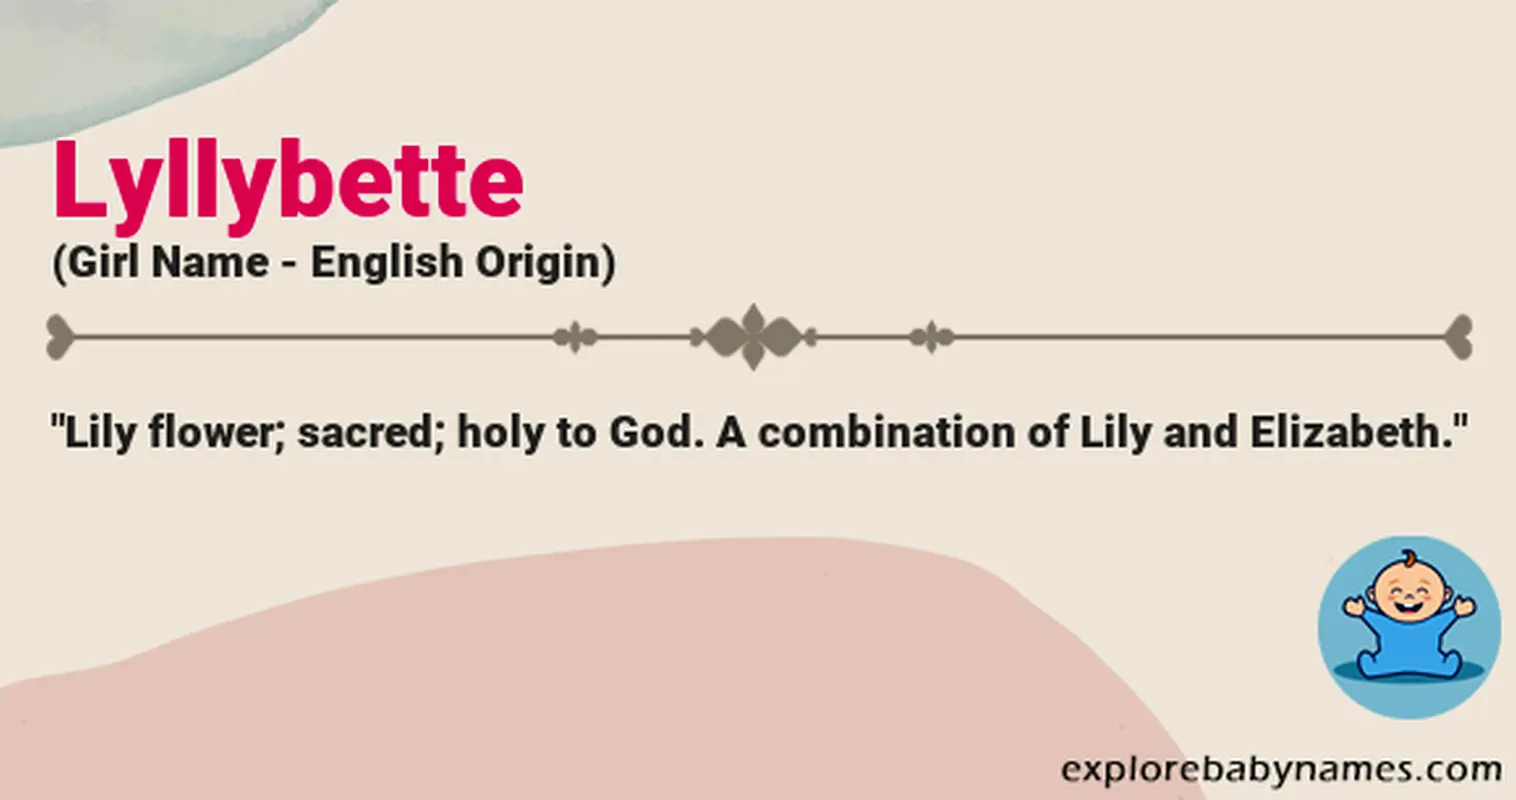 Meaning of Lyllybette